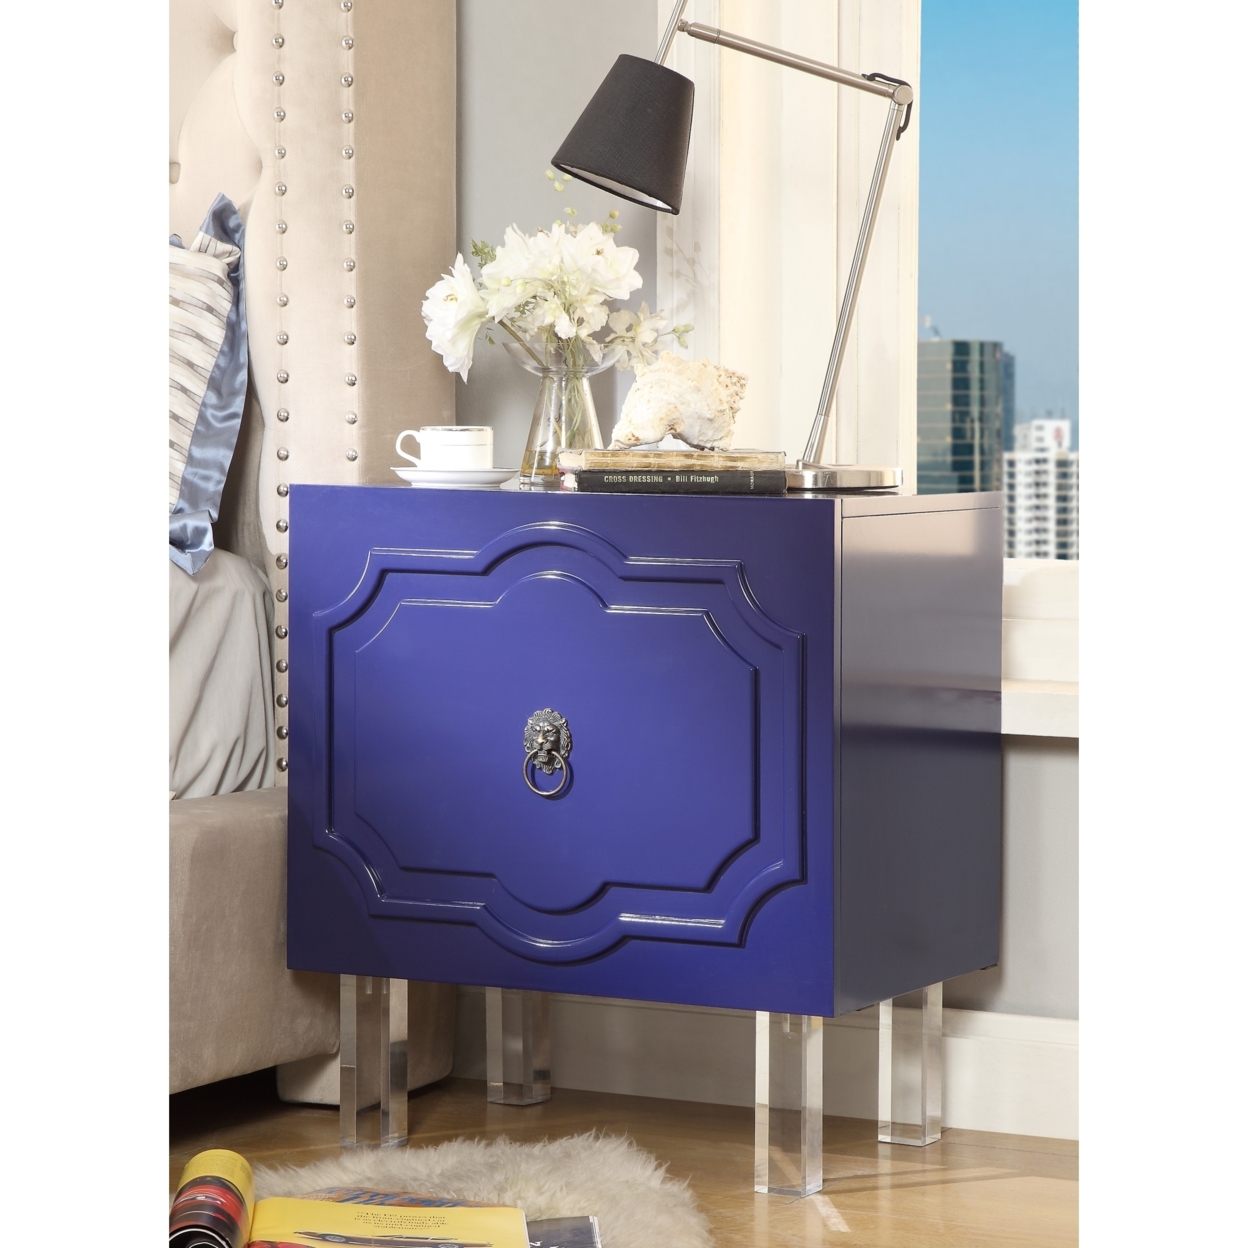 Anastasia Glossy Nightstand-Lacquer Finish-Side Table-Acrylic Lucite Legs-Modern & Functional By Inspired Home - White